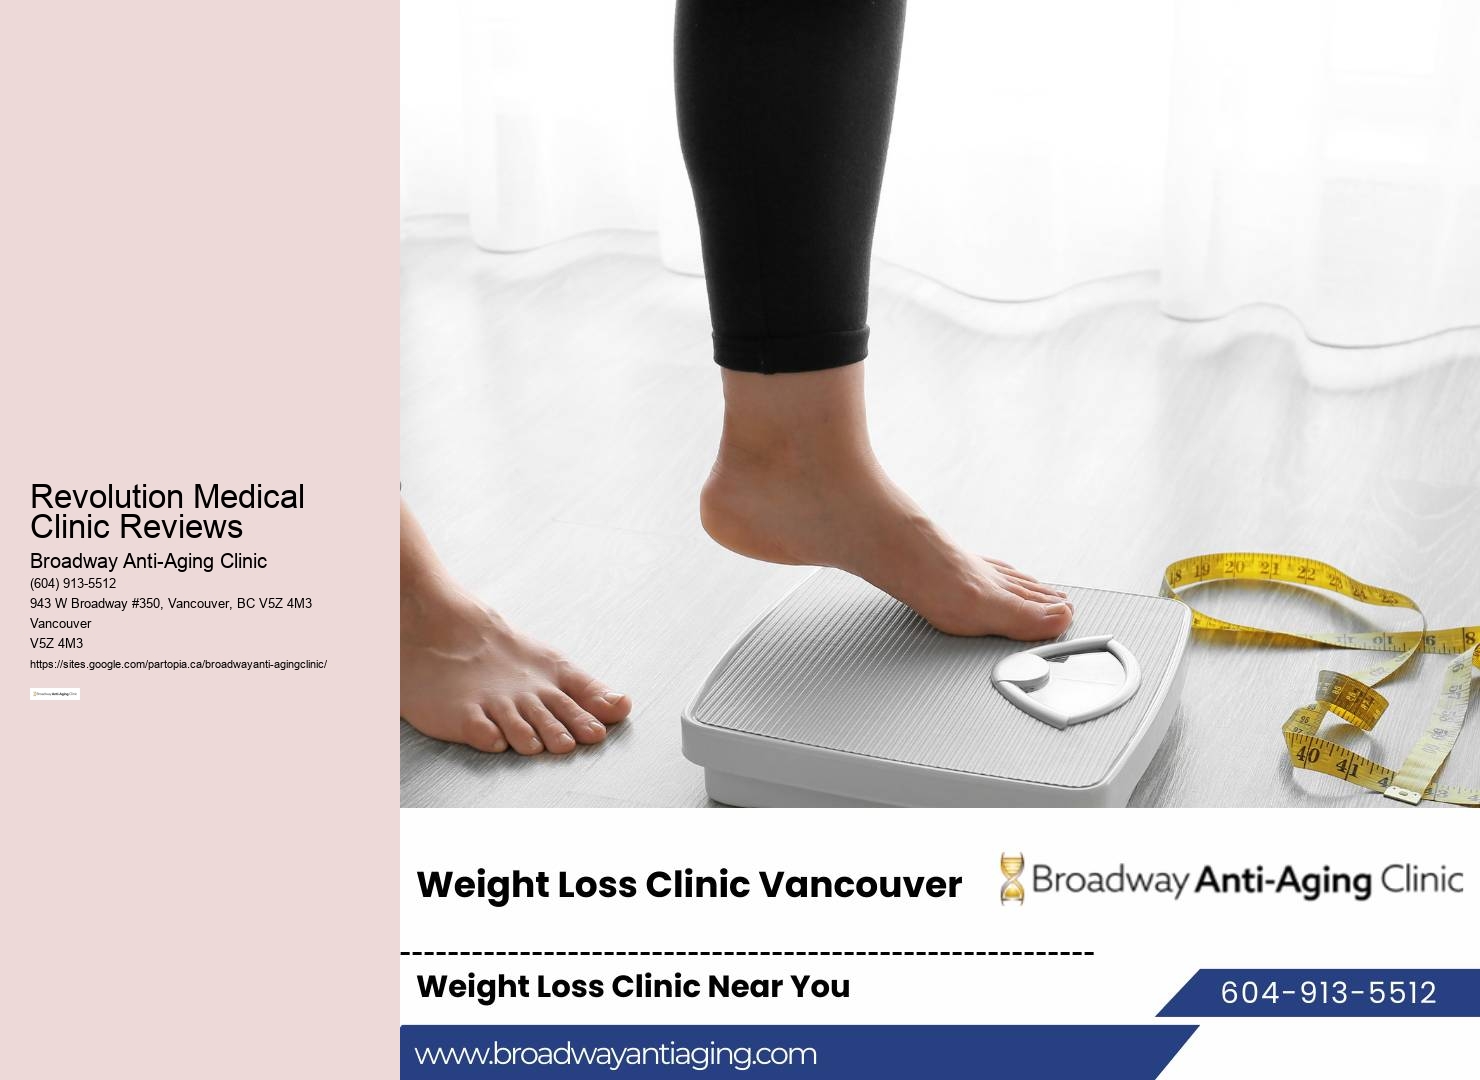 Vancouver Weight Loss Program Clinic